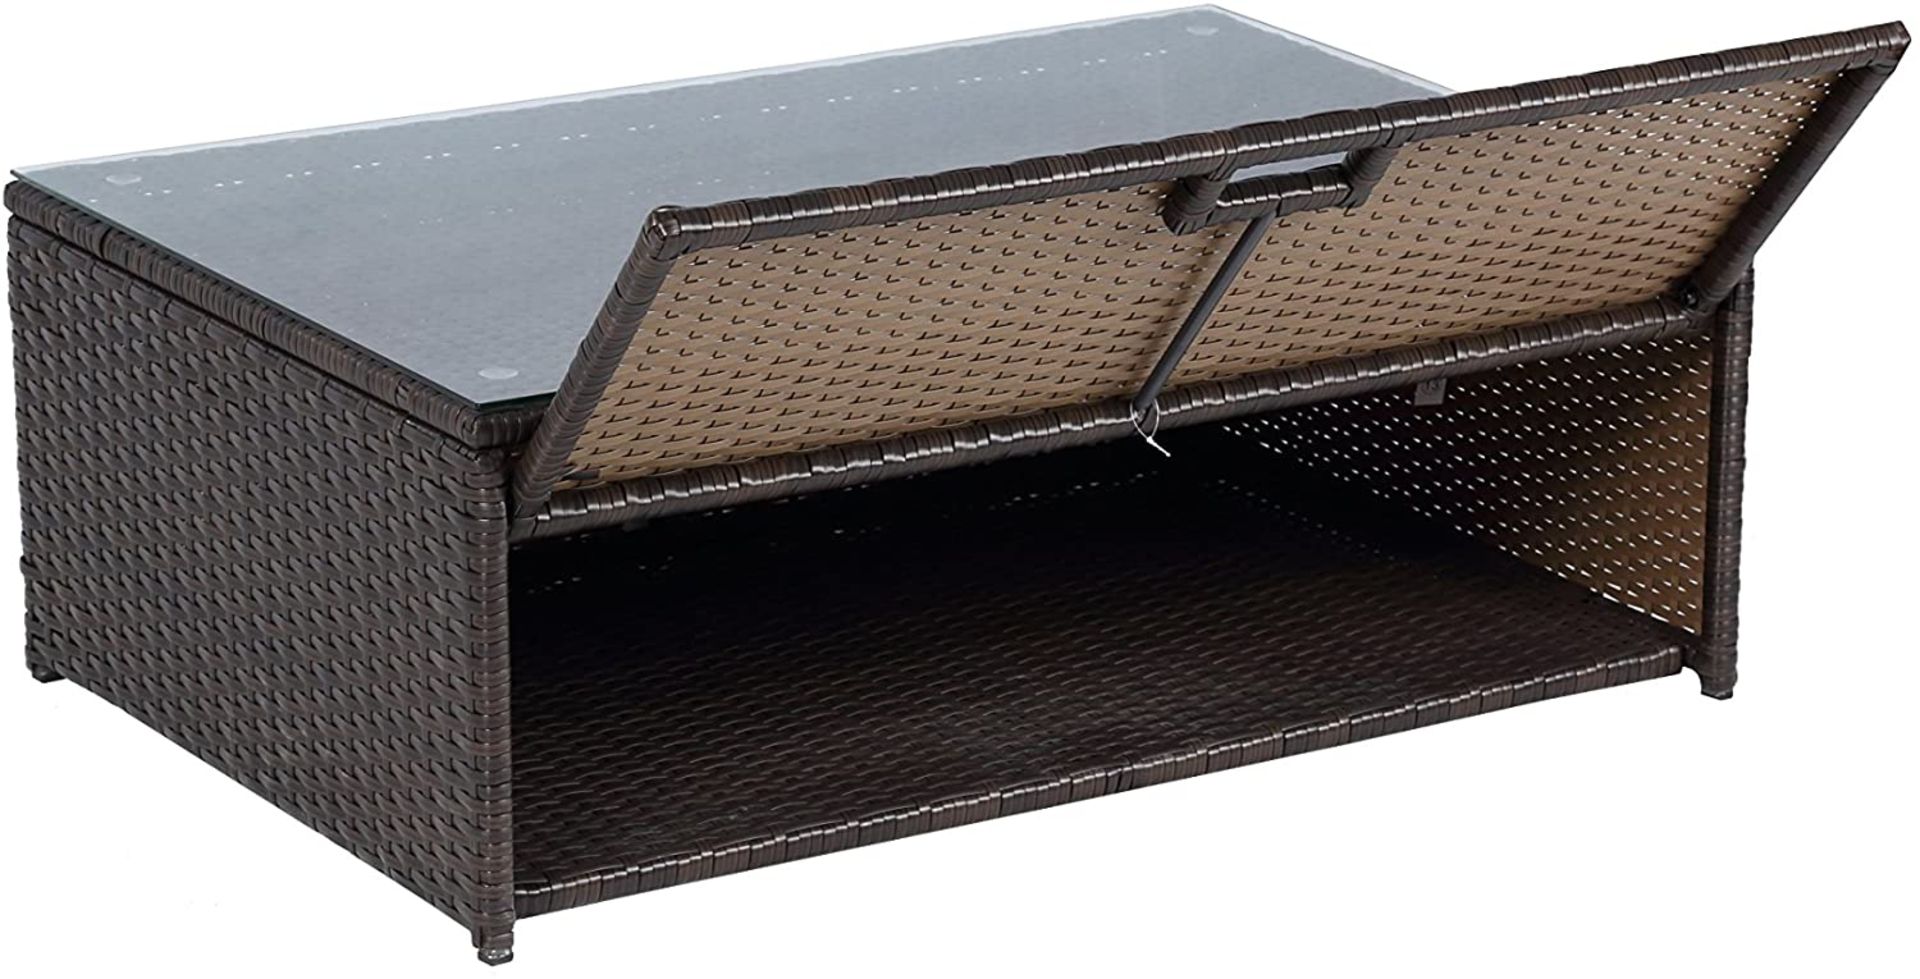 * 1 xBrand New - In Cardboard Boxes - Garden Rattan Furntiure Set. Black Wick with Grey Cushions. - Image 5 of 6